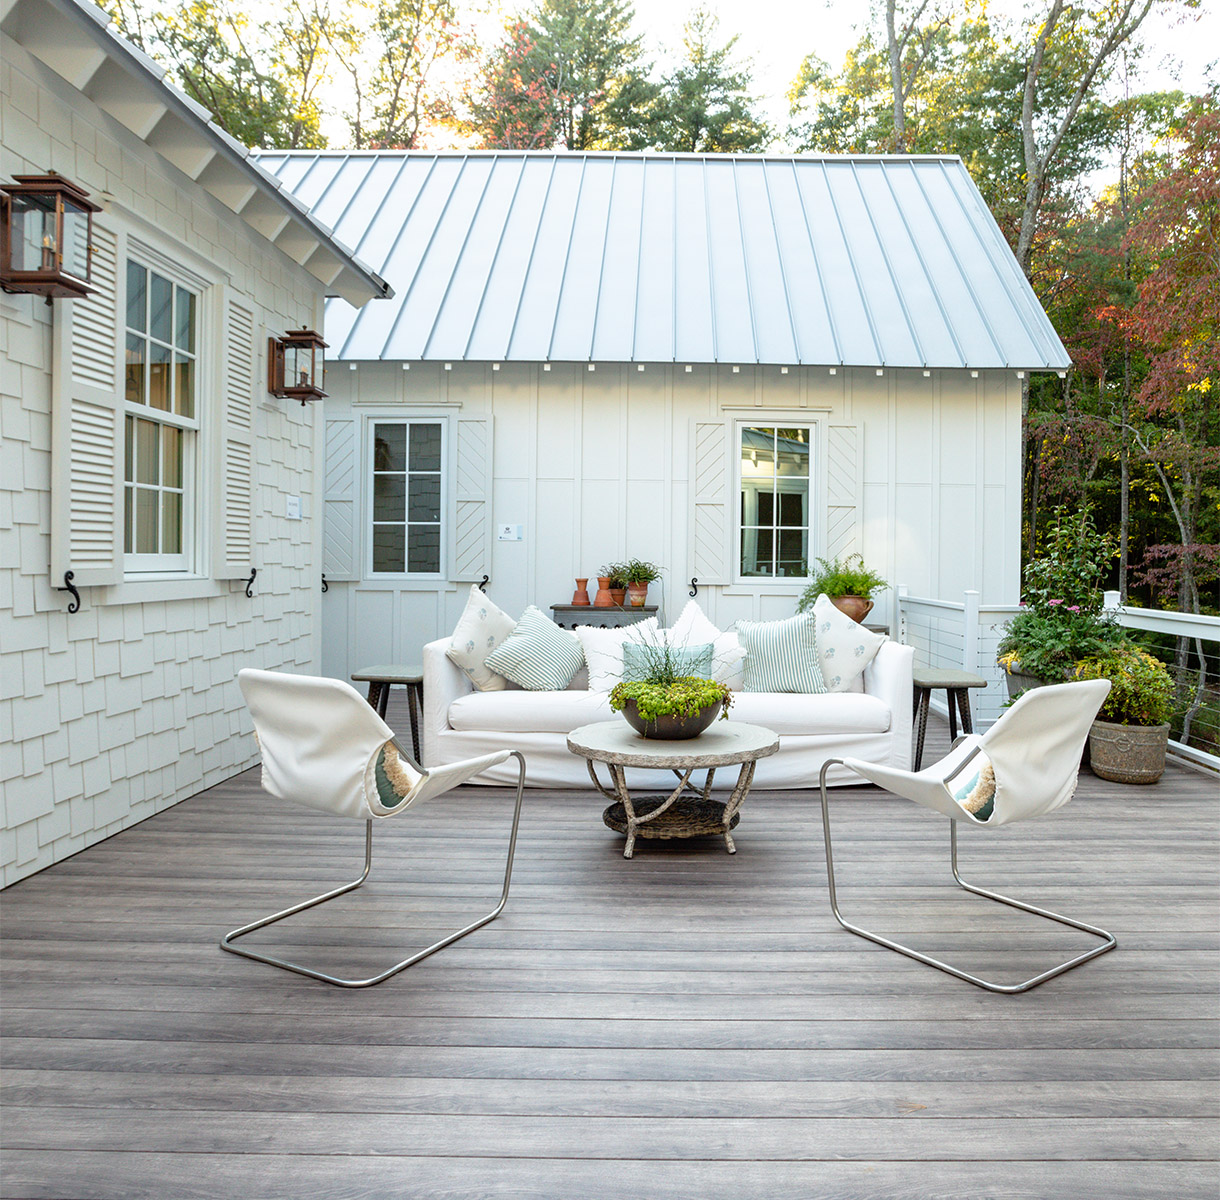 Wooden deck on a white house